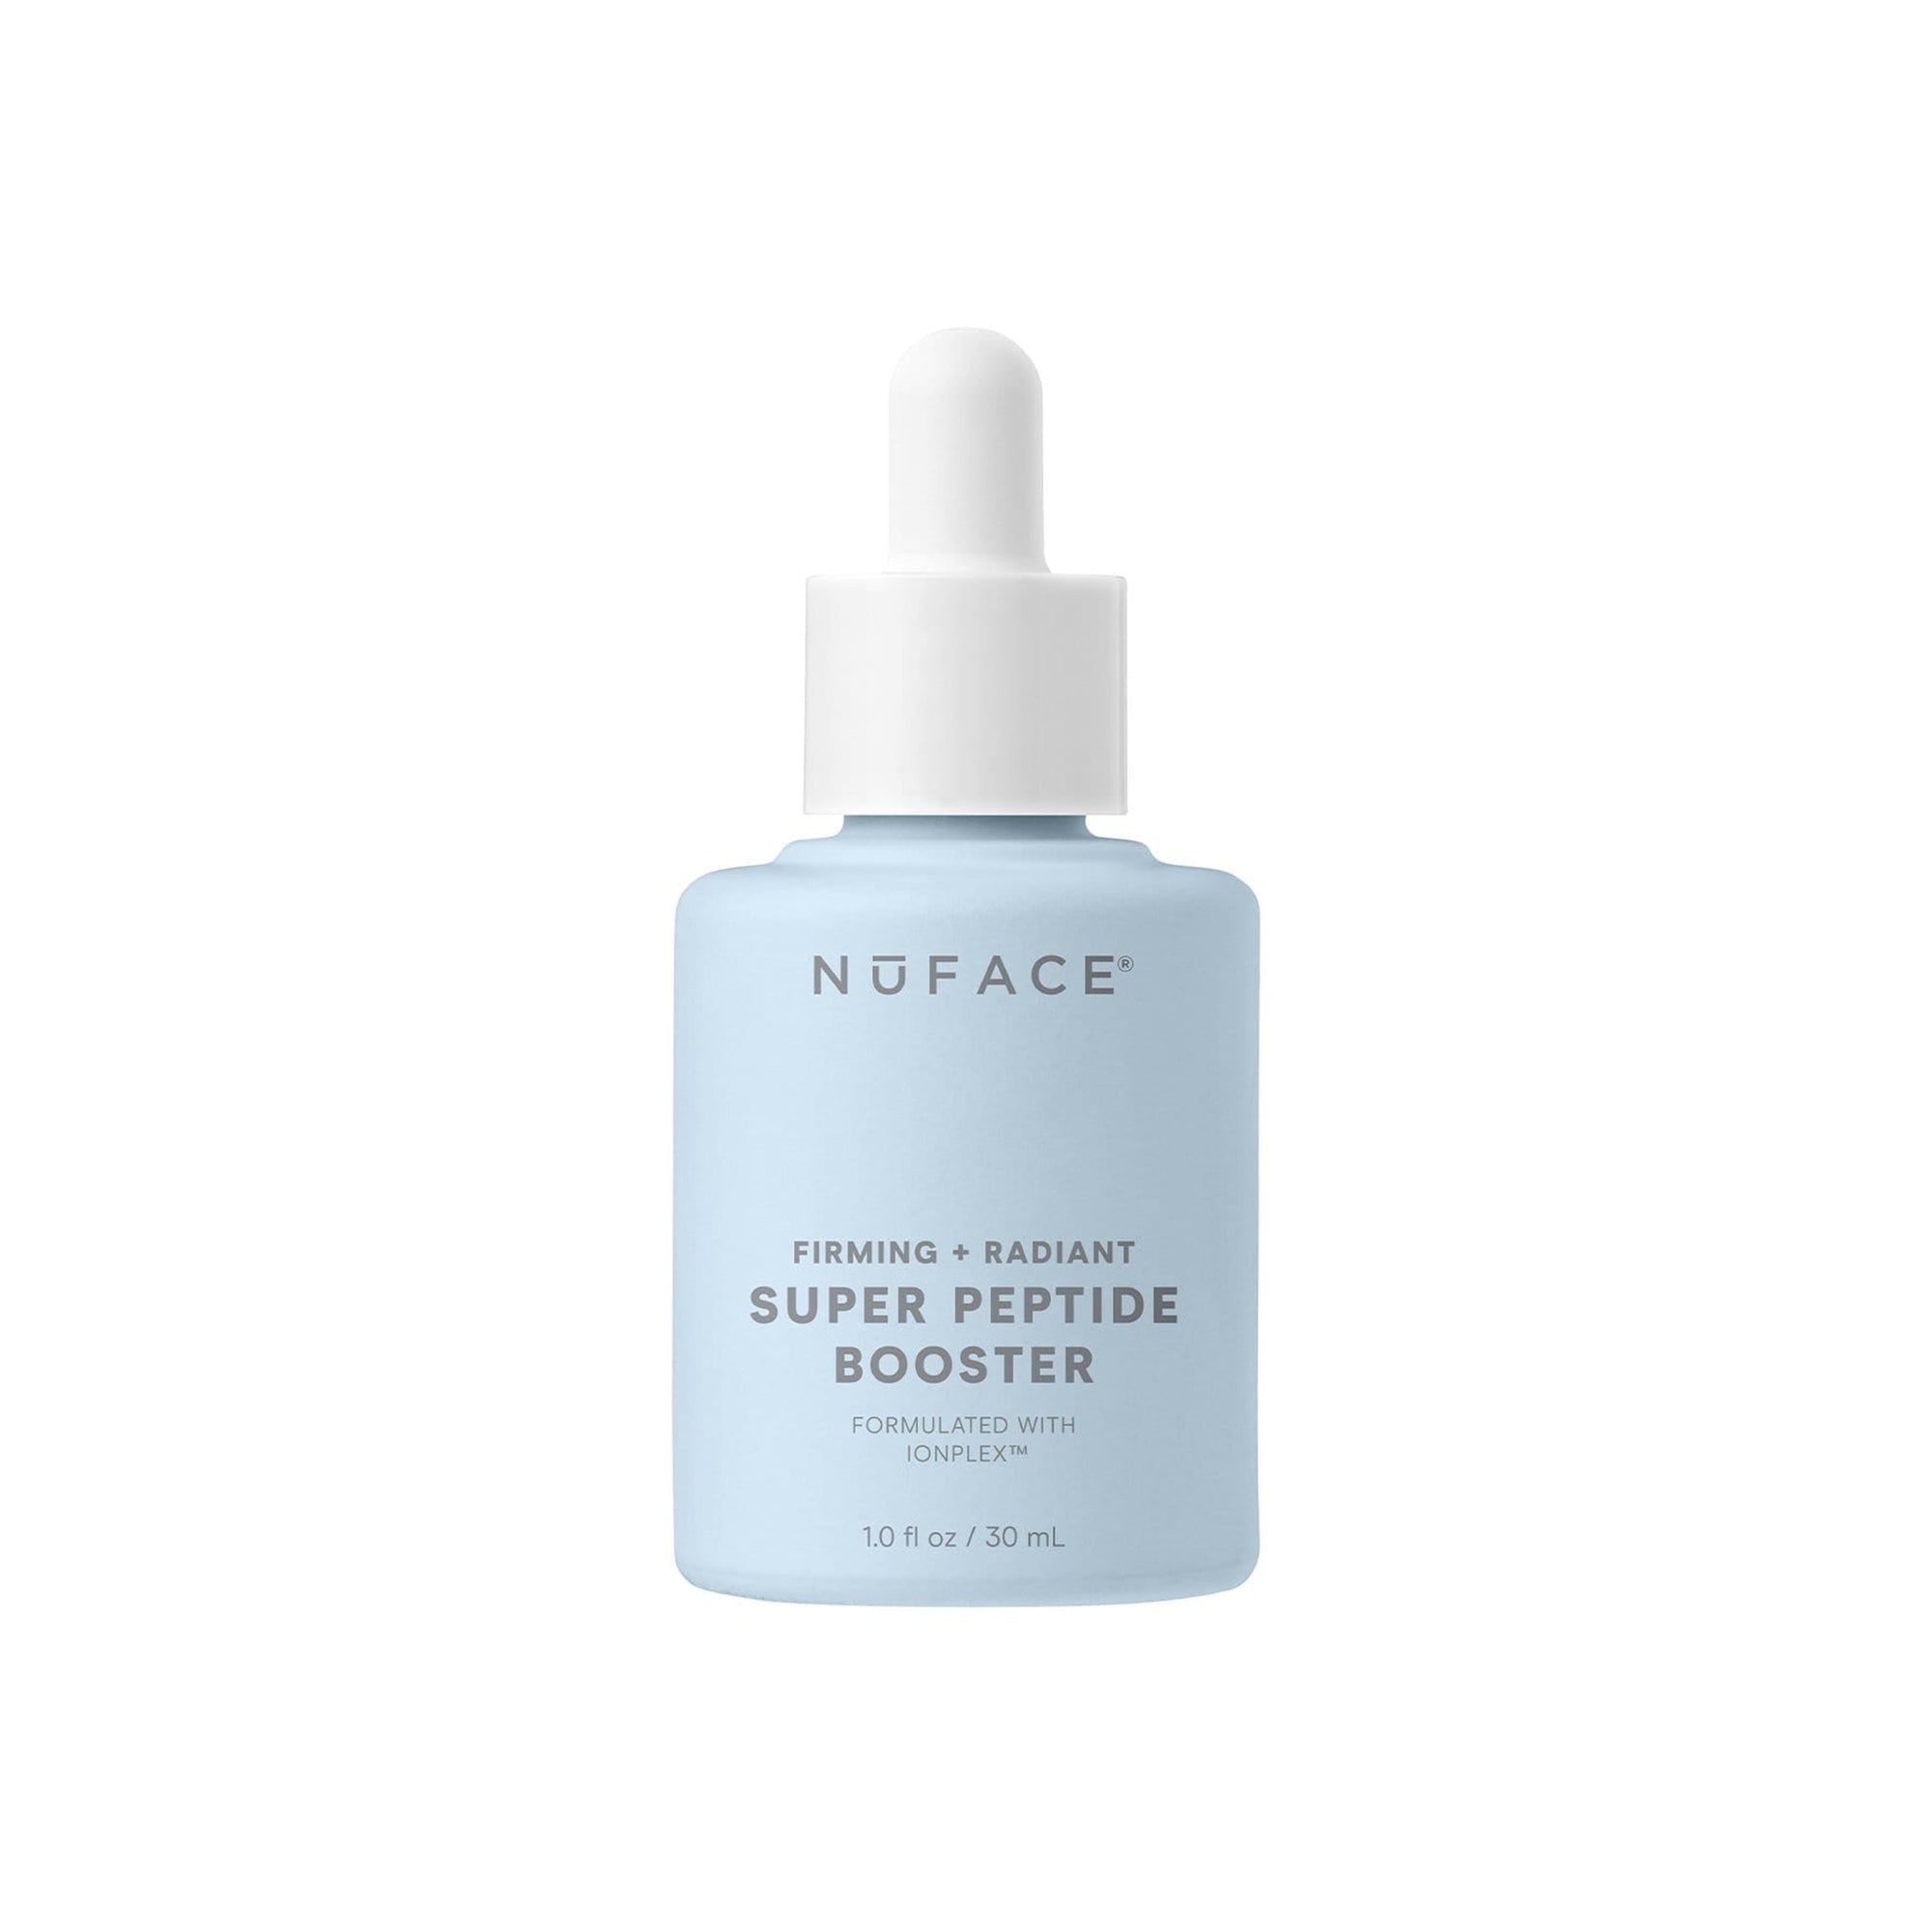 Nuface Super Peptide Booster - Firming & Radiant / 1OZ